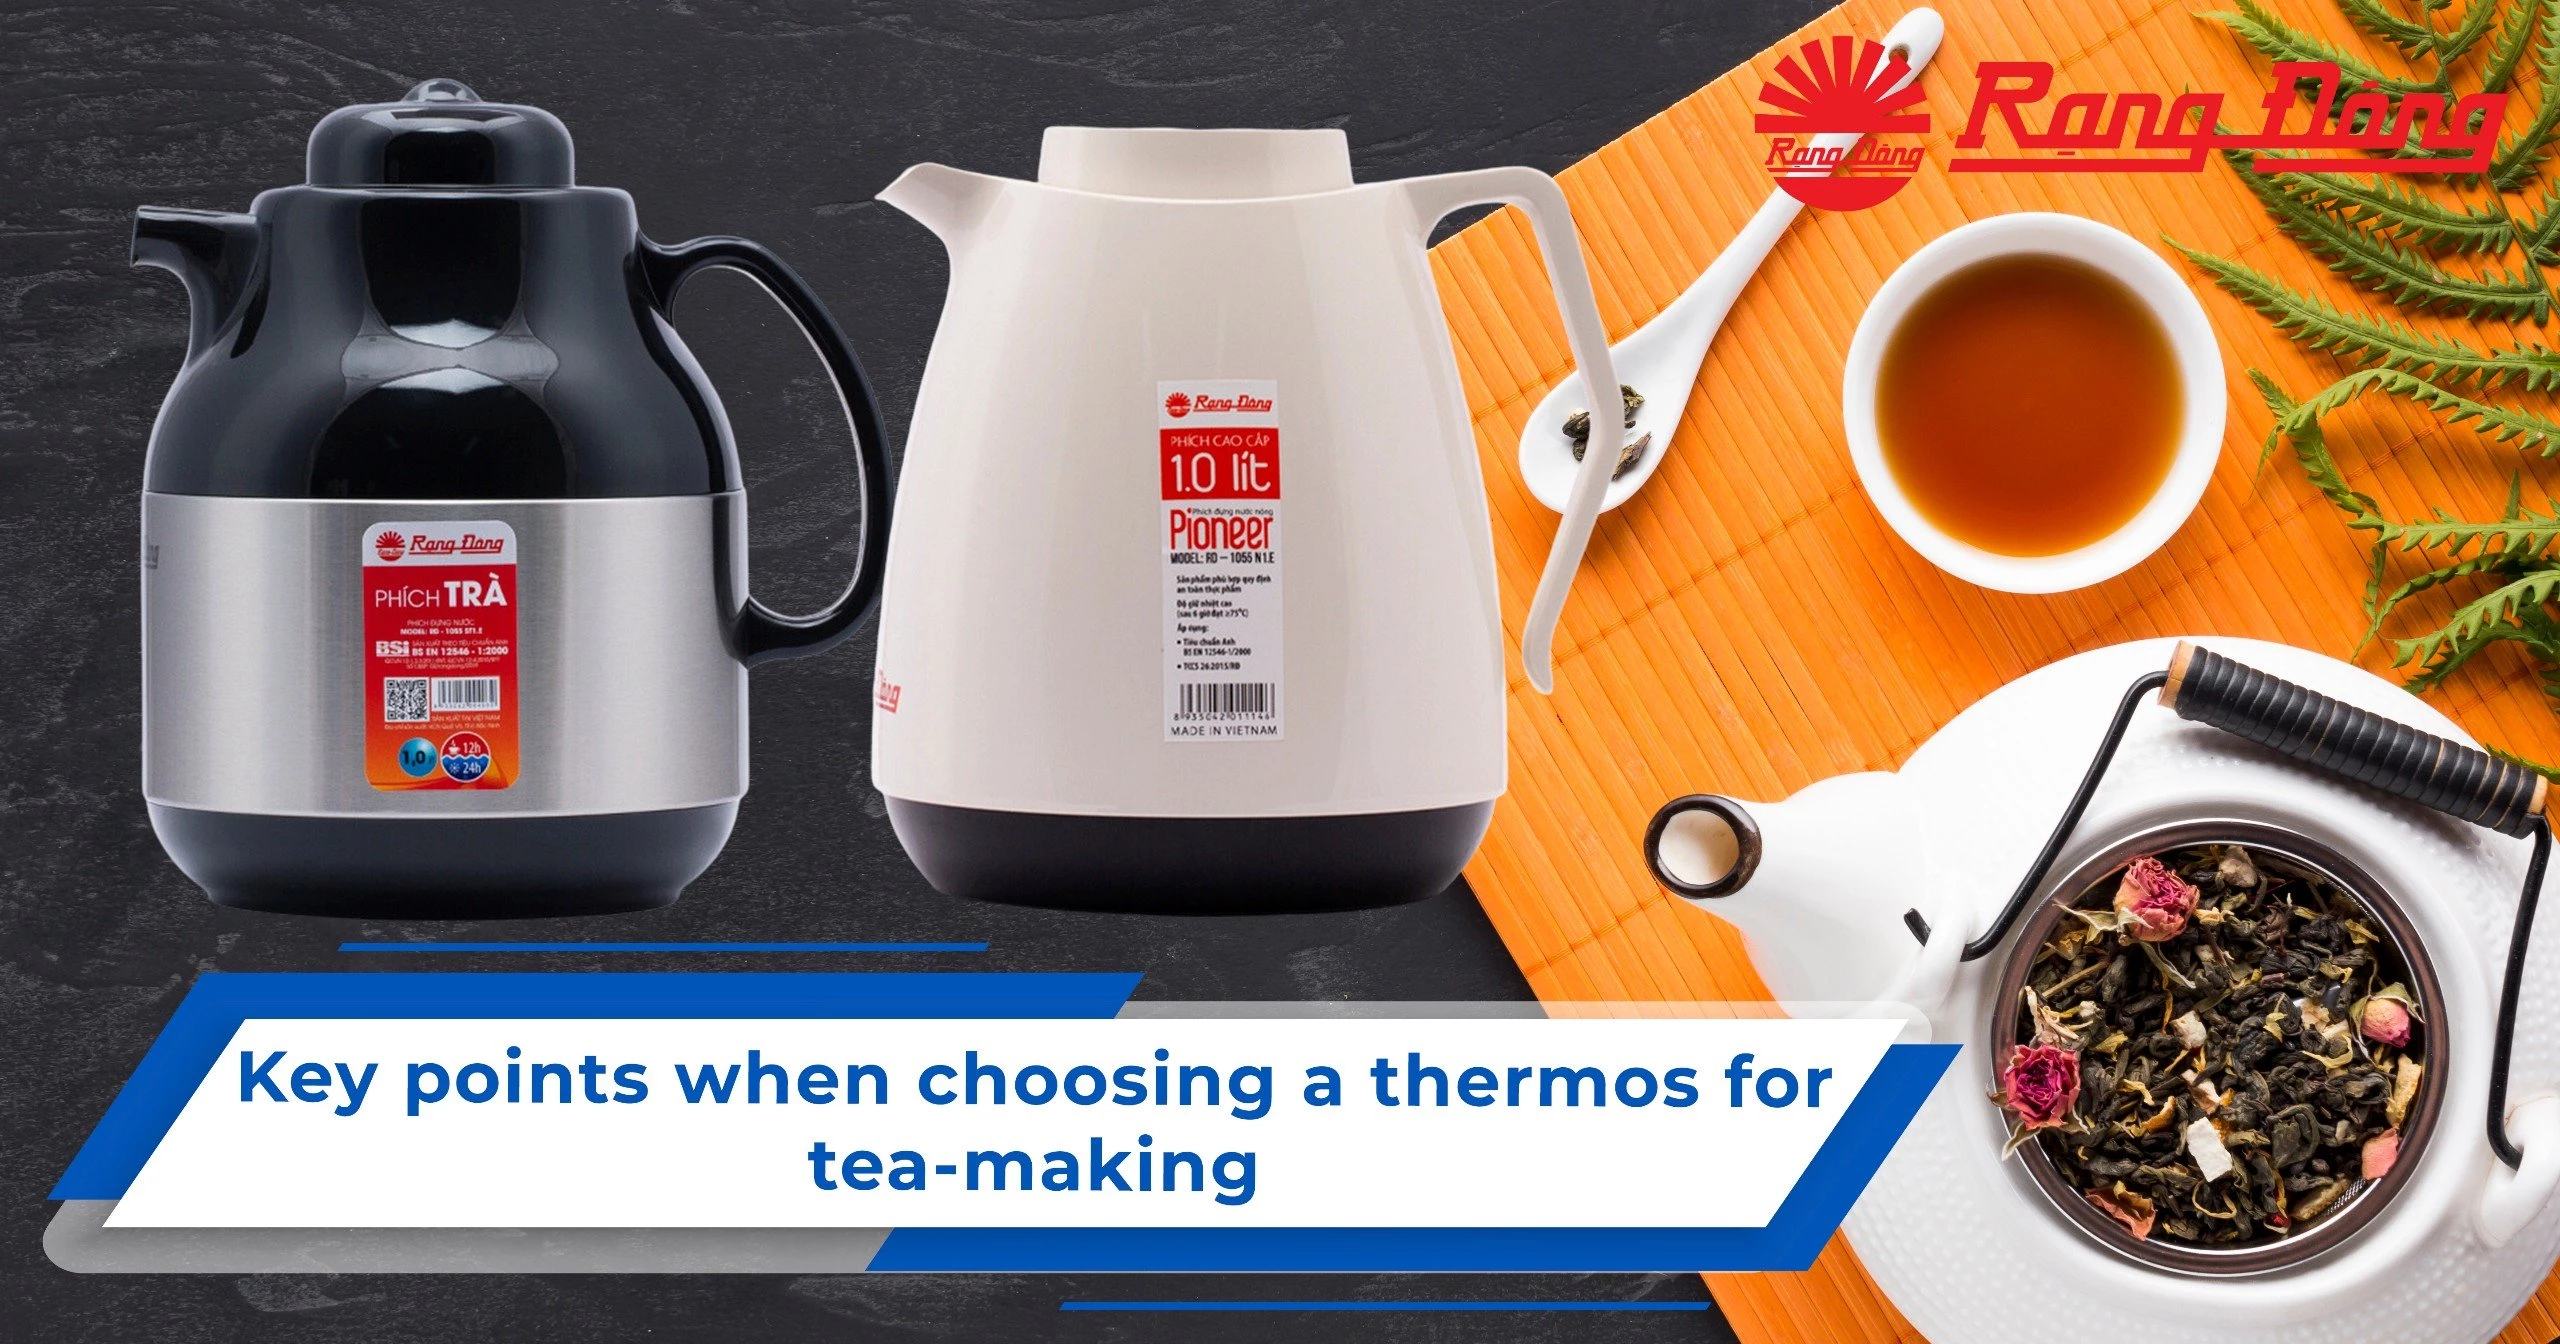 Key points when choosing a thermos for tea brewing